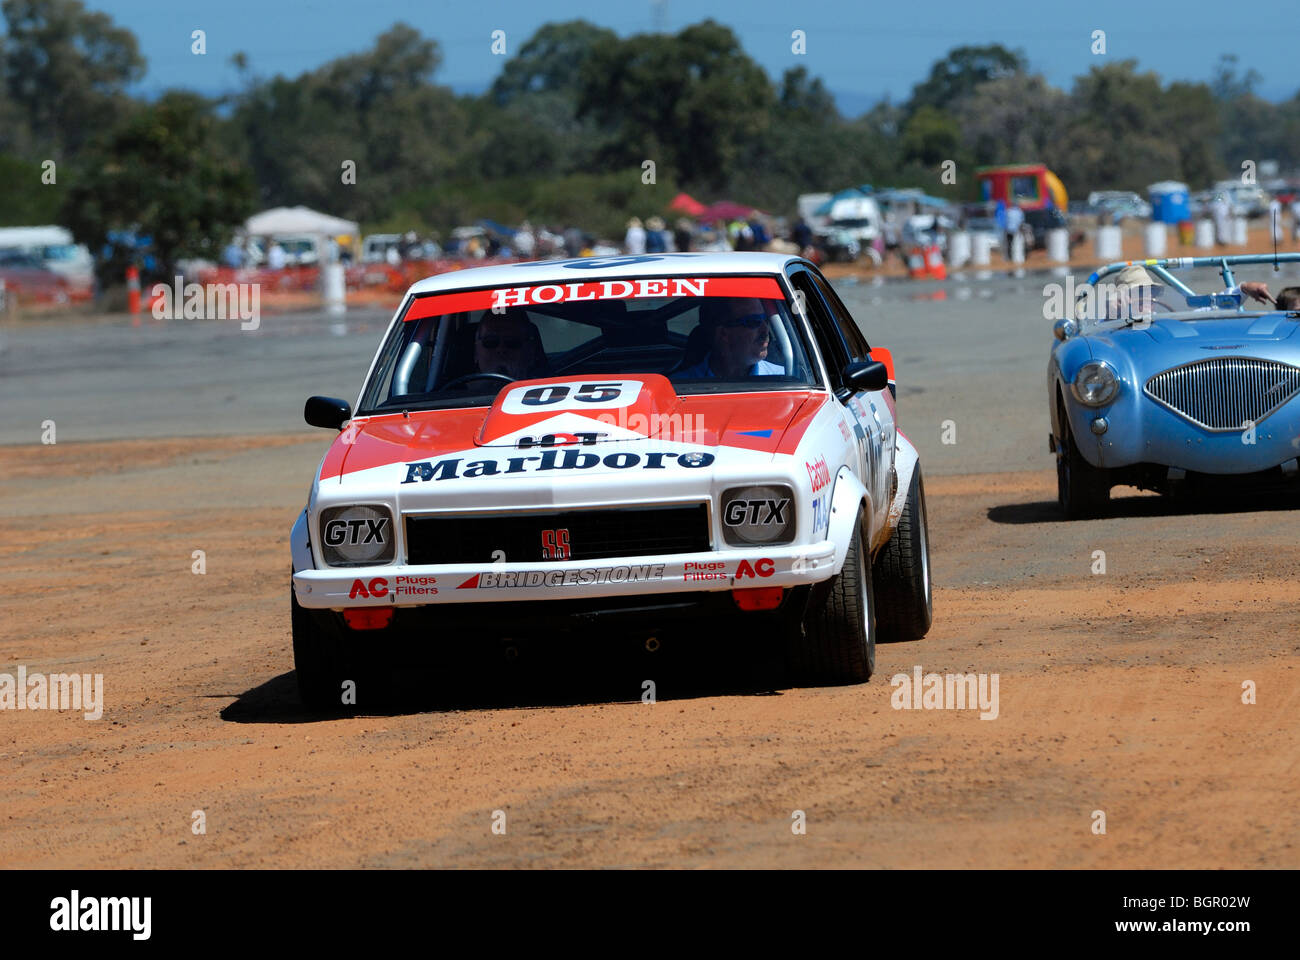 Replica of the Holden LX Torana SS A9X with which the late Peter Brock and Jim Richards won the 1979 Bathurst 1000 Stock Photo